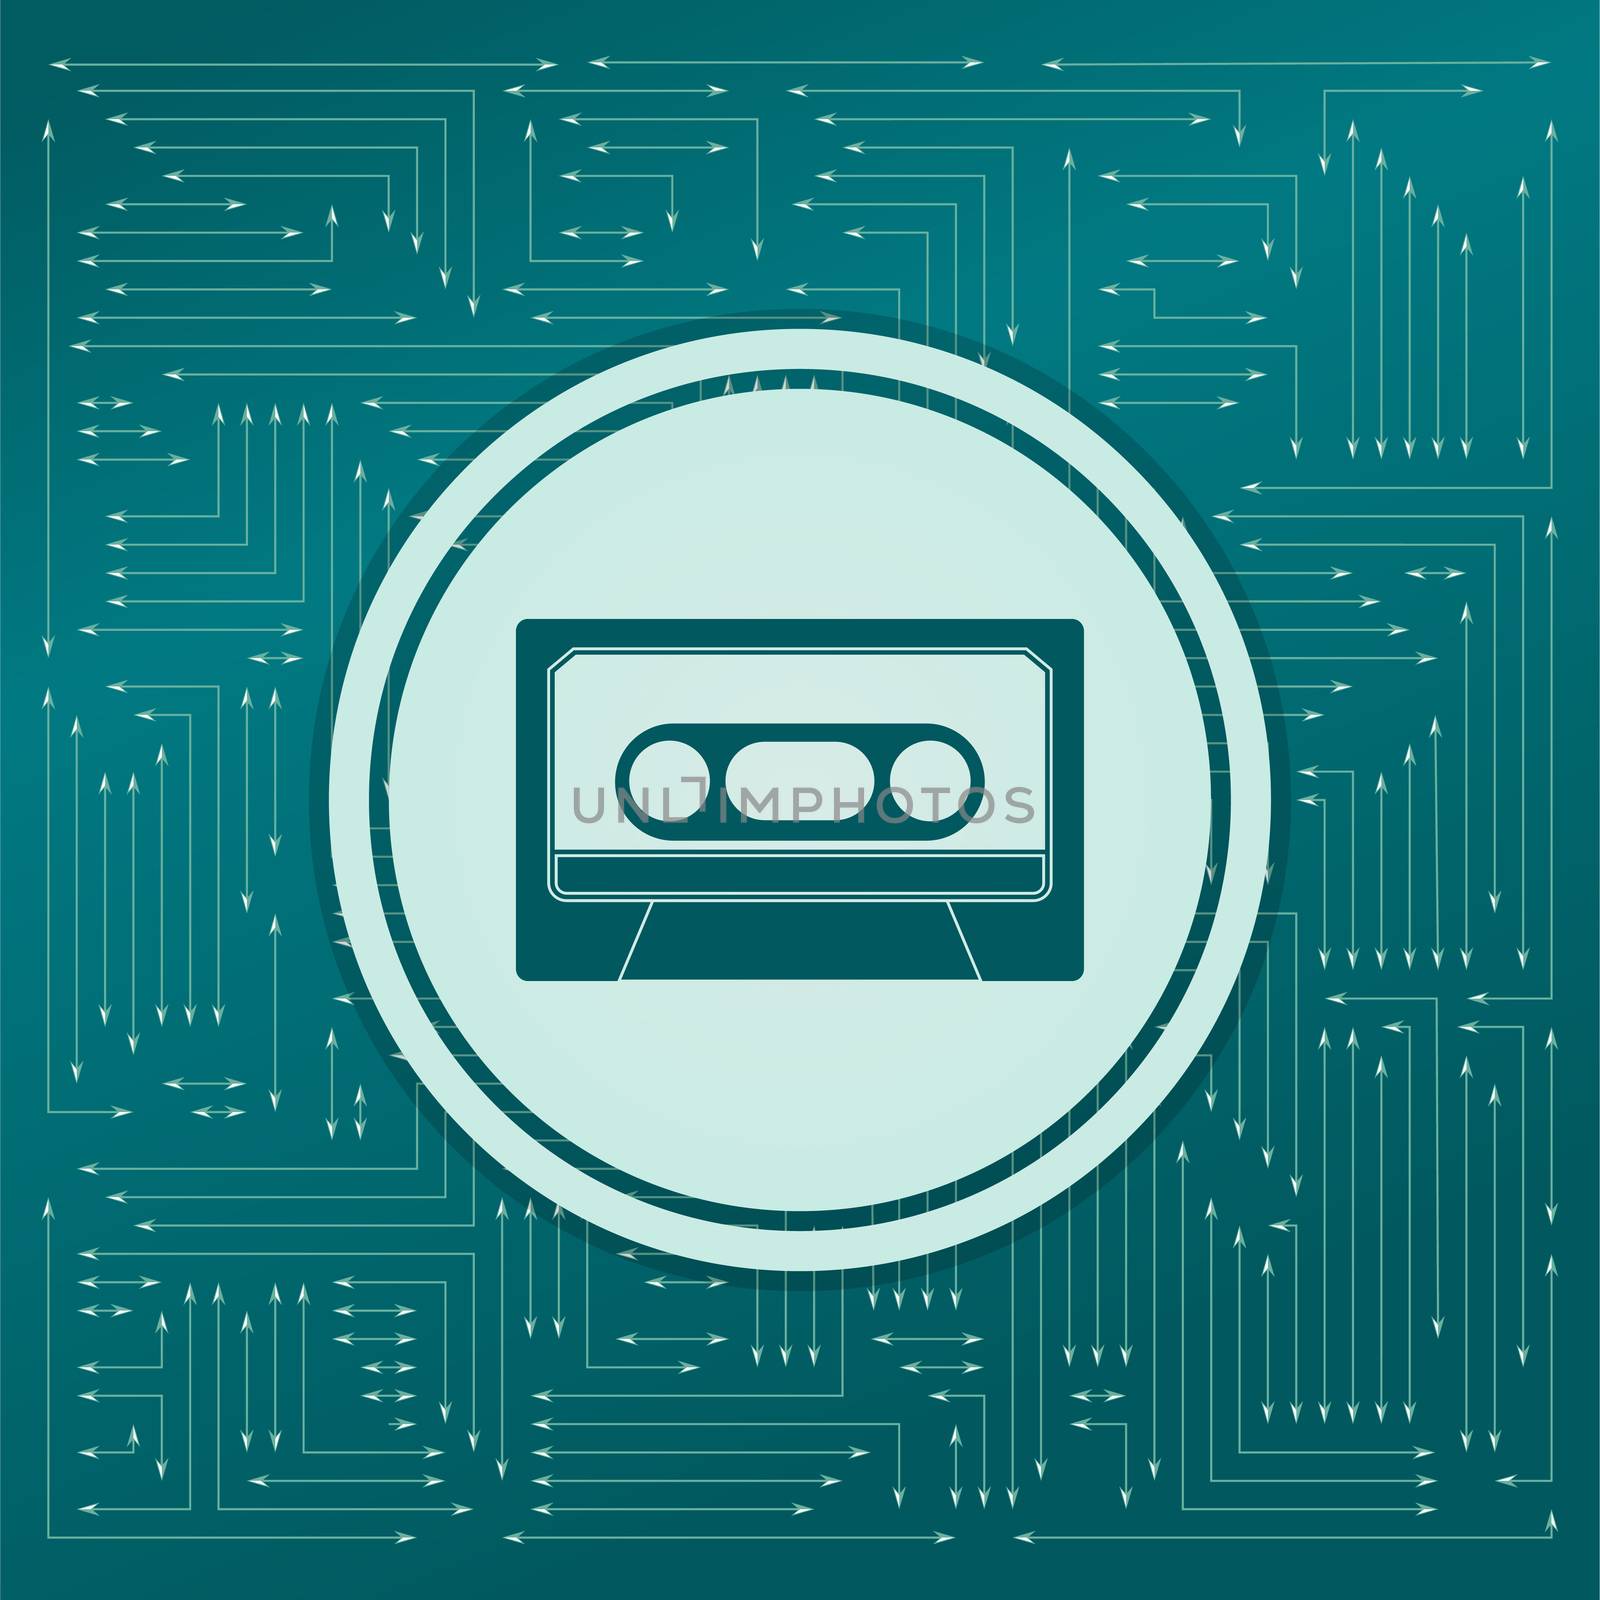 Cassette icon on a green background, with arrows in different directions. It appears on the electronic board. illustration